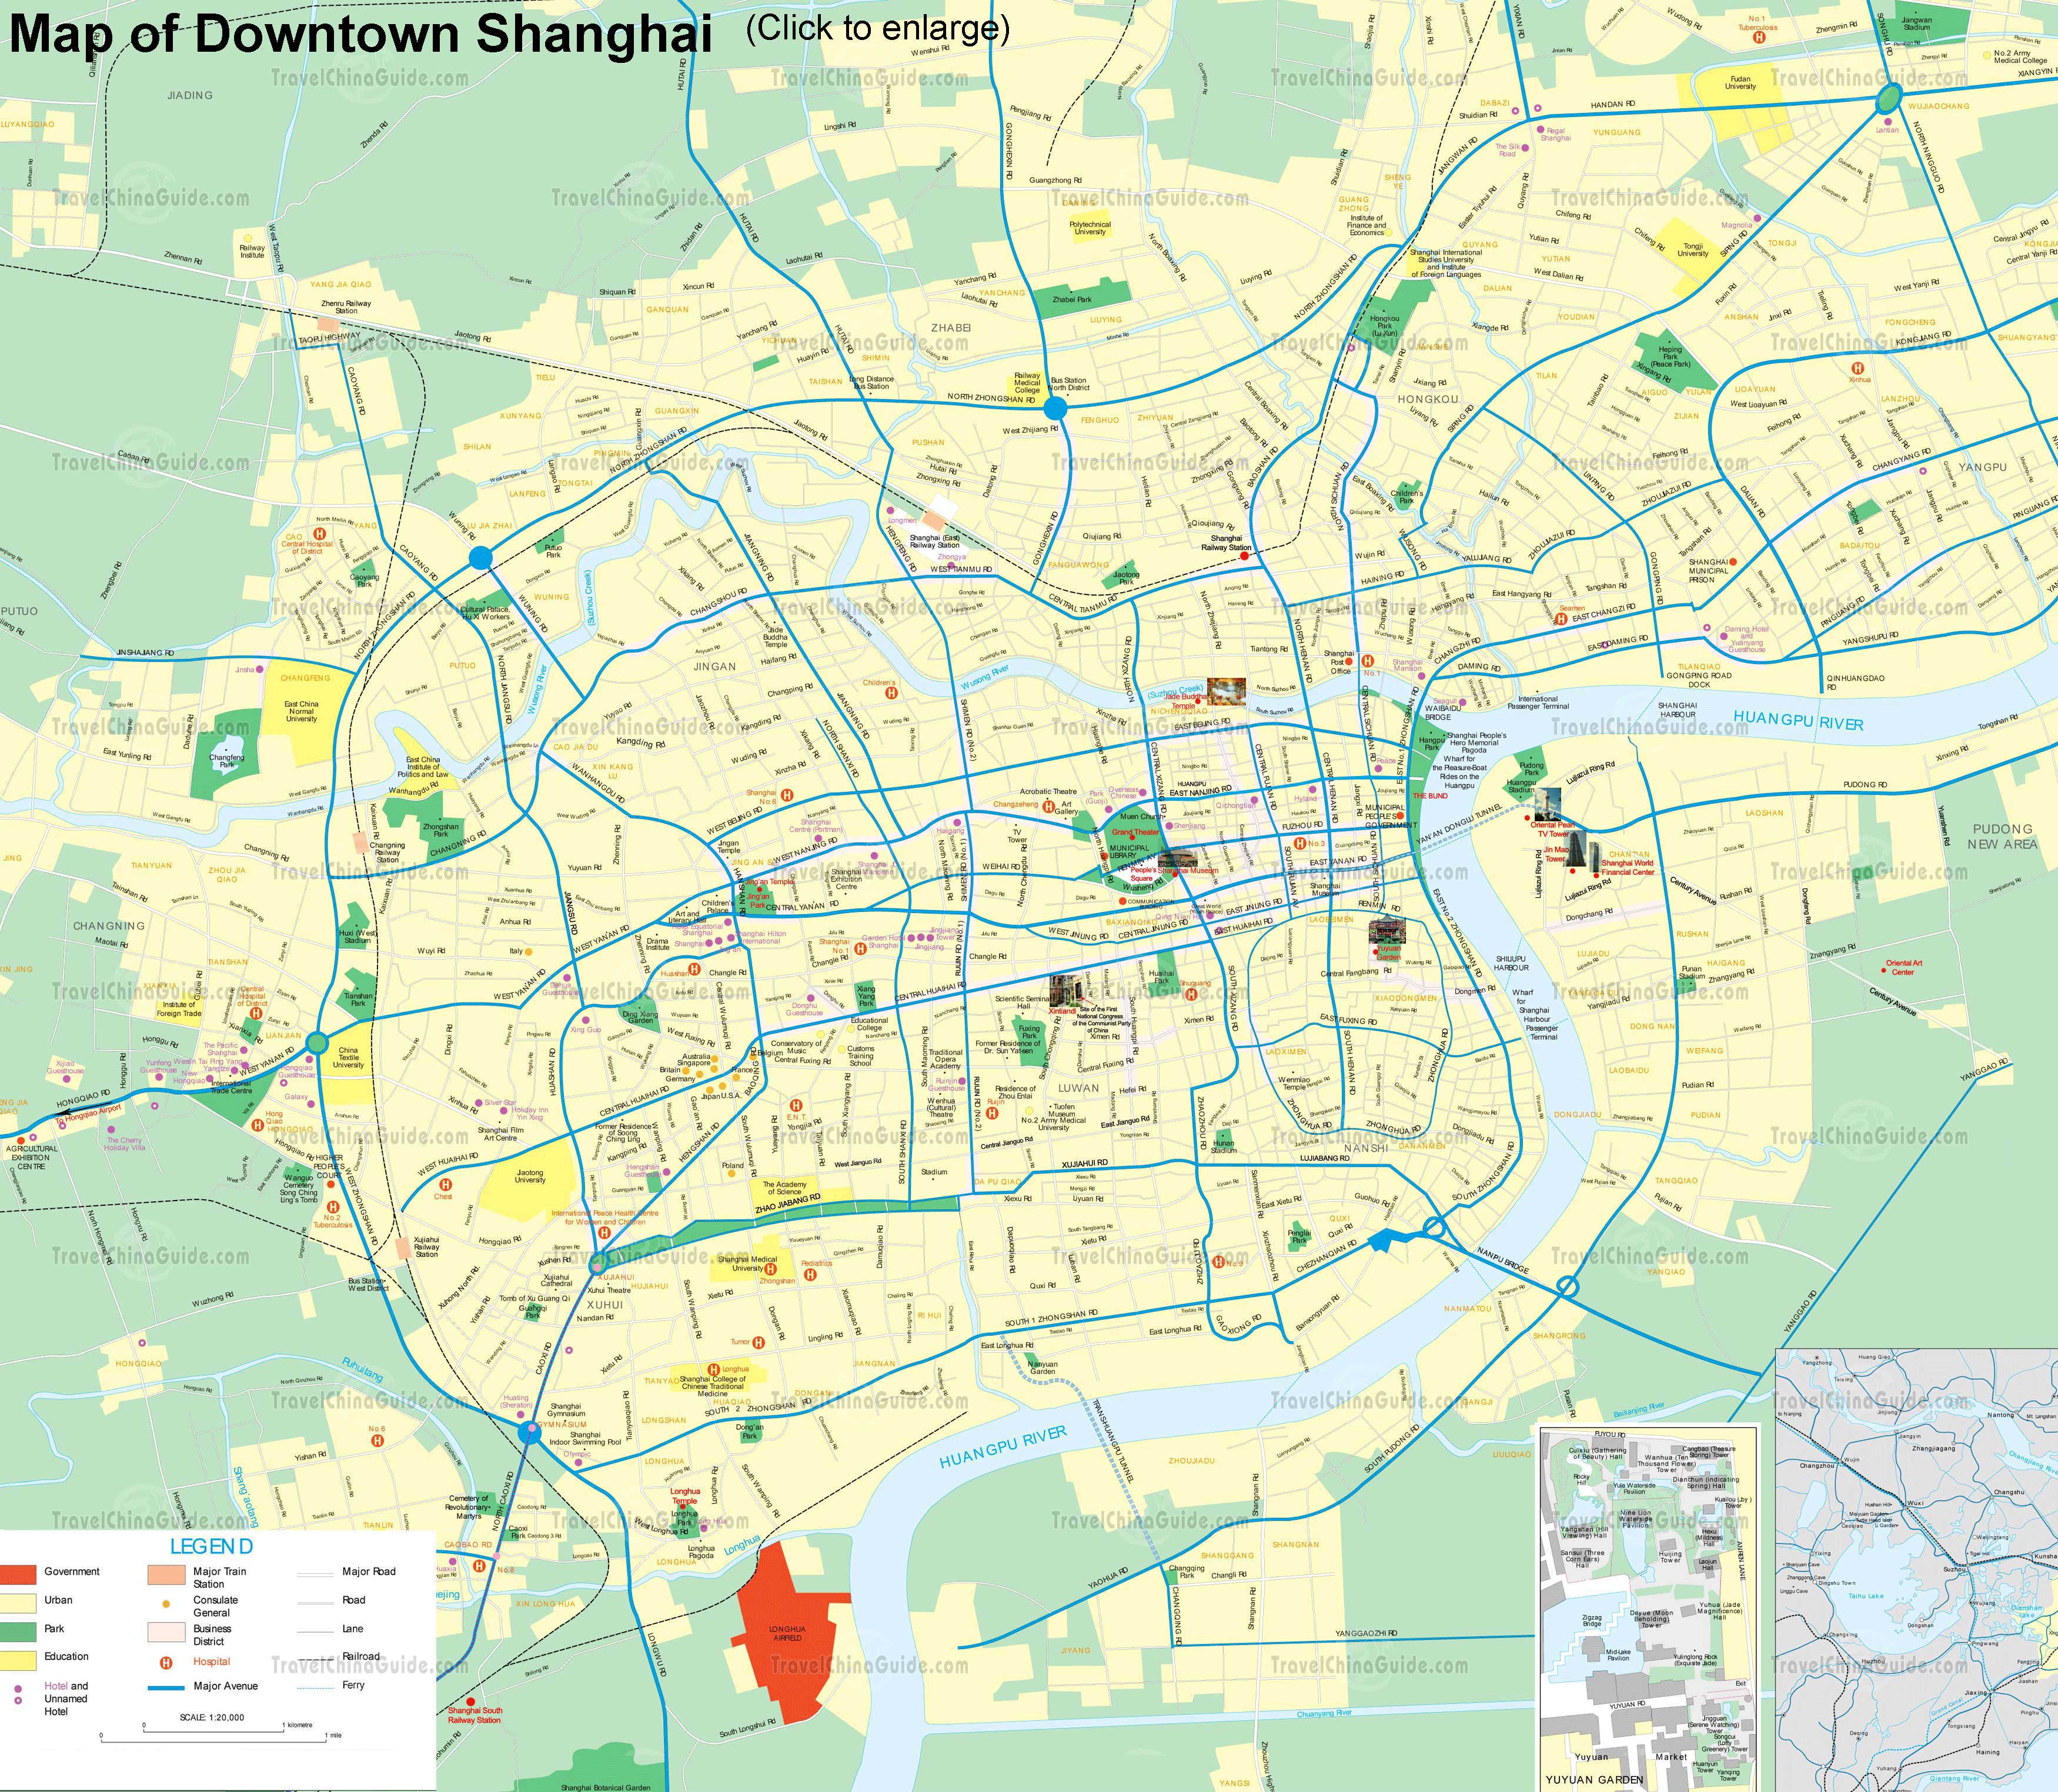 Maps of Shanghai China: Streets, Subway Lines, Attractions, City ...